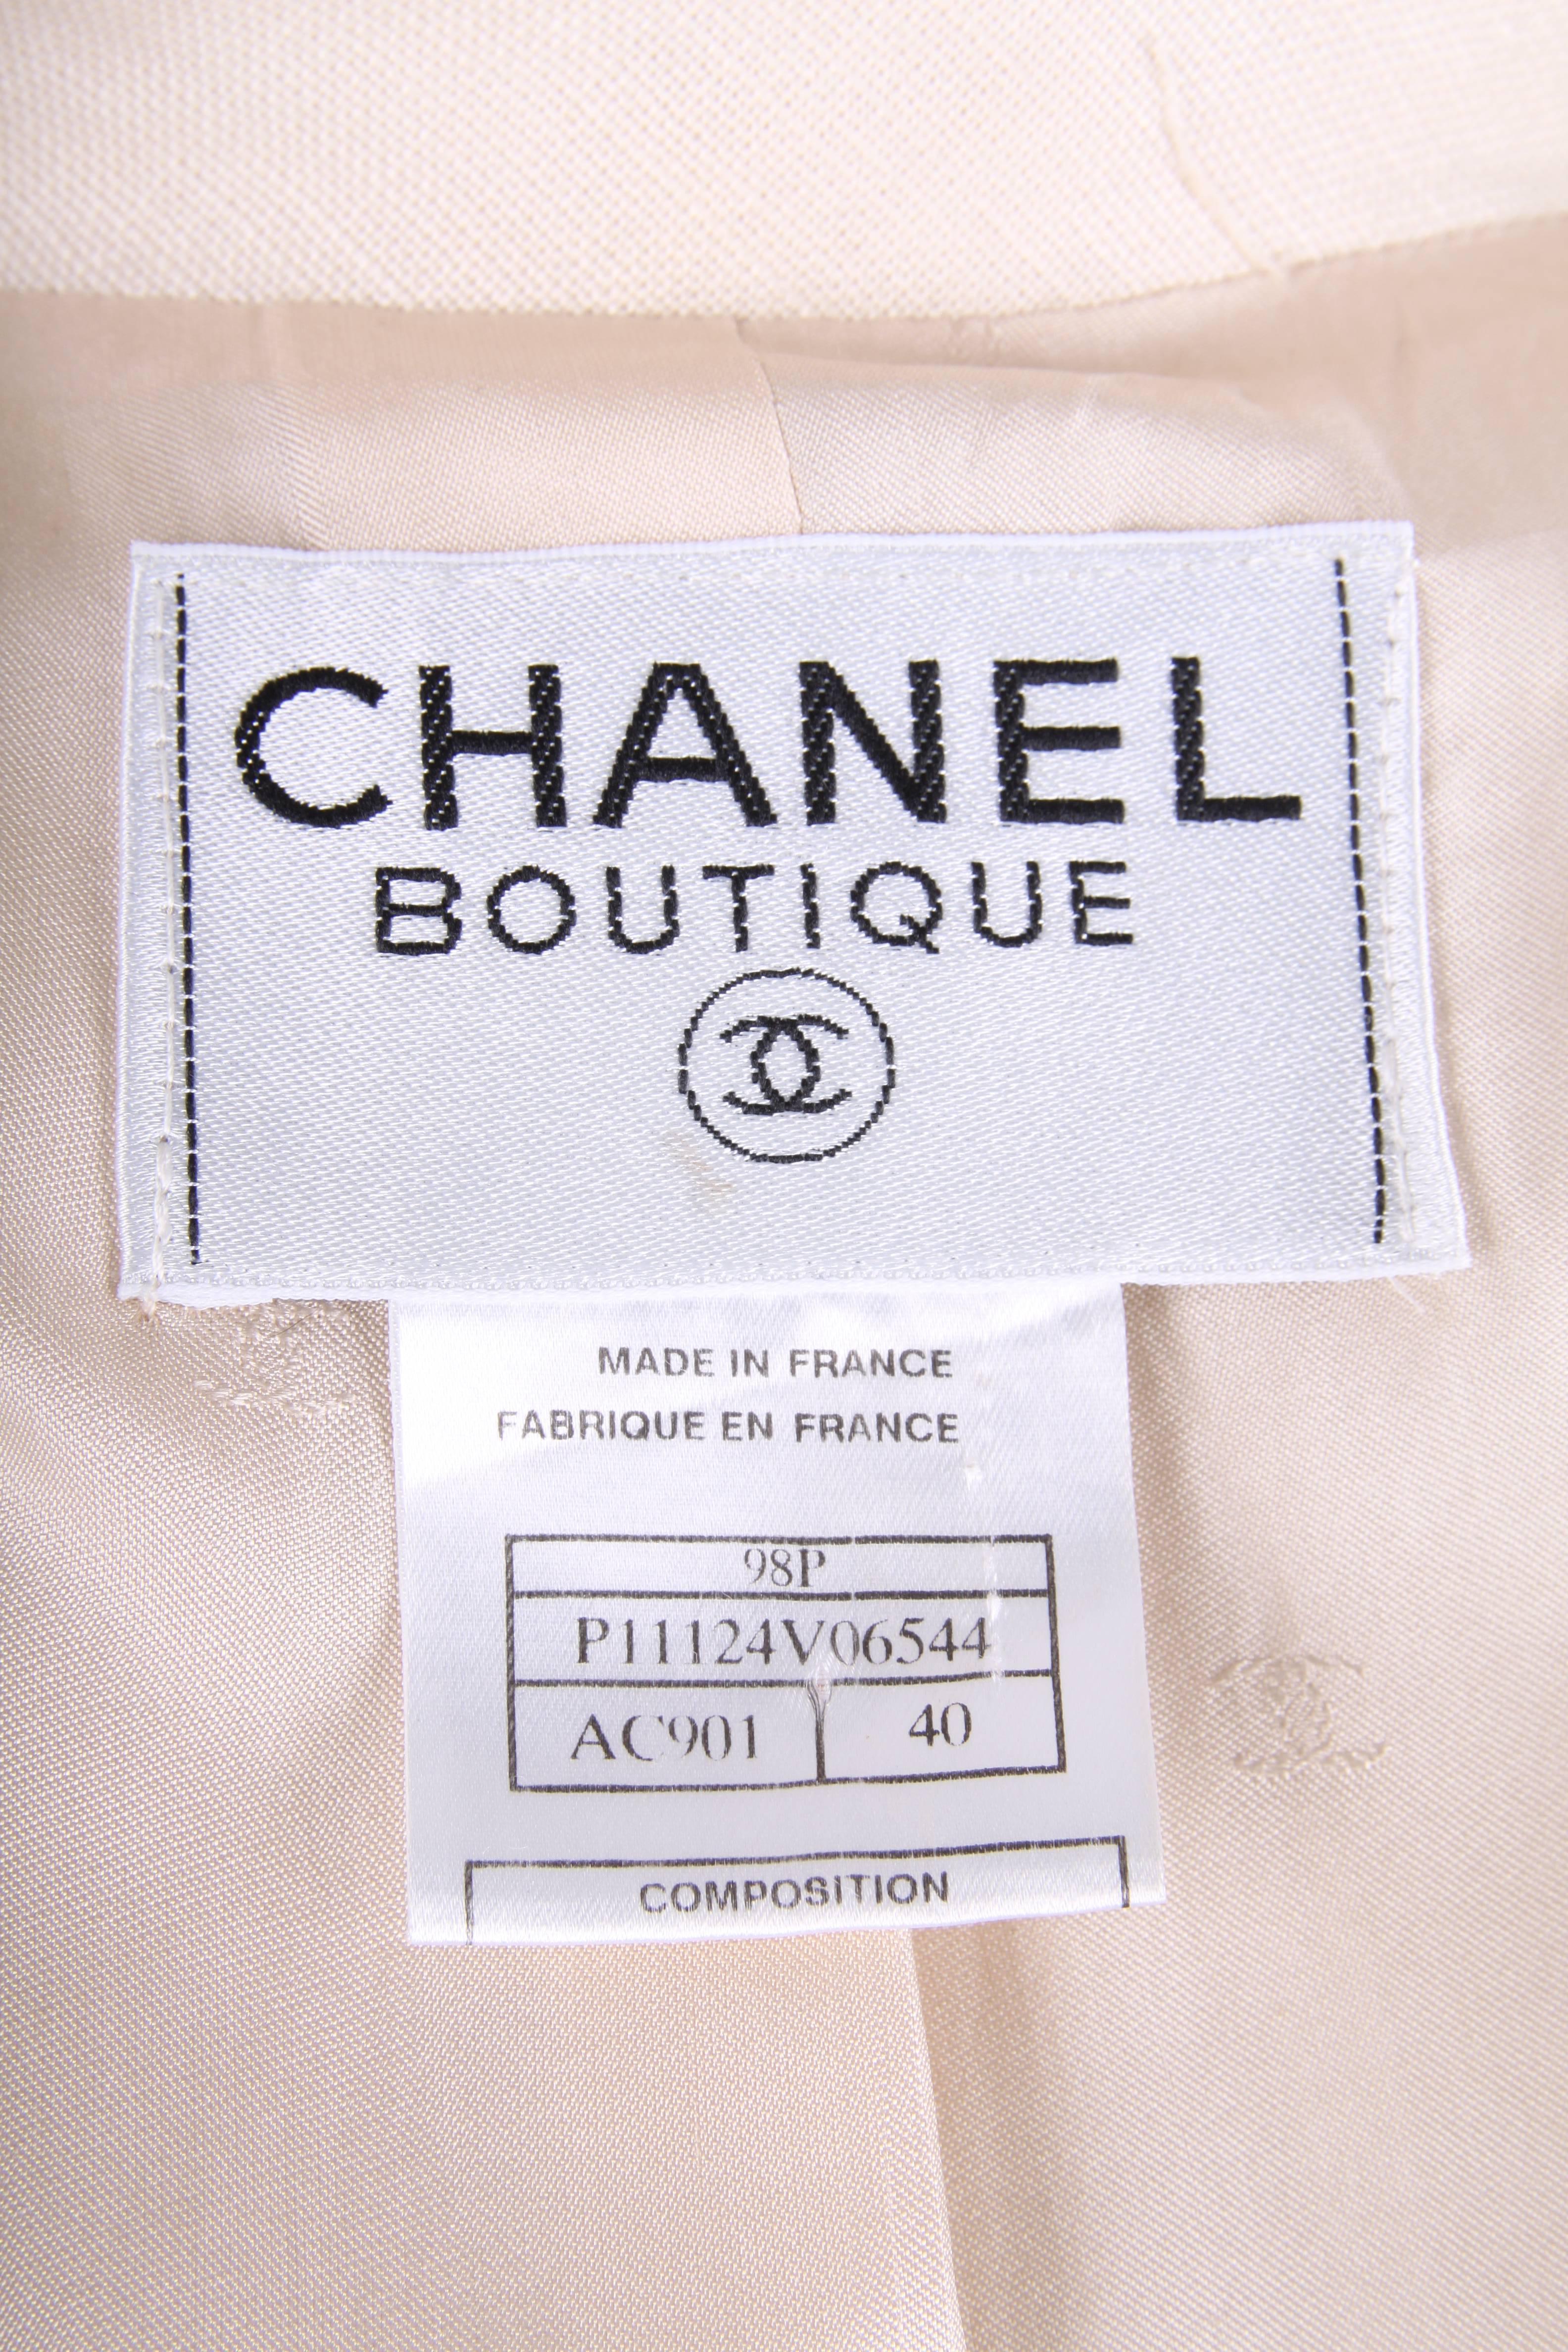 Sophisticated jacket by Chanel in beige linen, nice!   

Low-cut lapels and single button closure at the front. The button is made of matte silver metal with a CC logo in the center. At the end of the long sleeves another one of these buttons, a